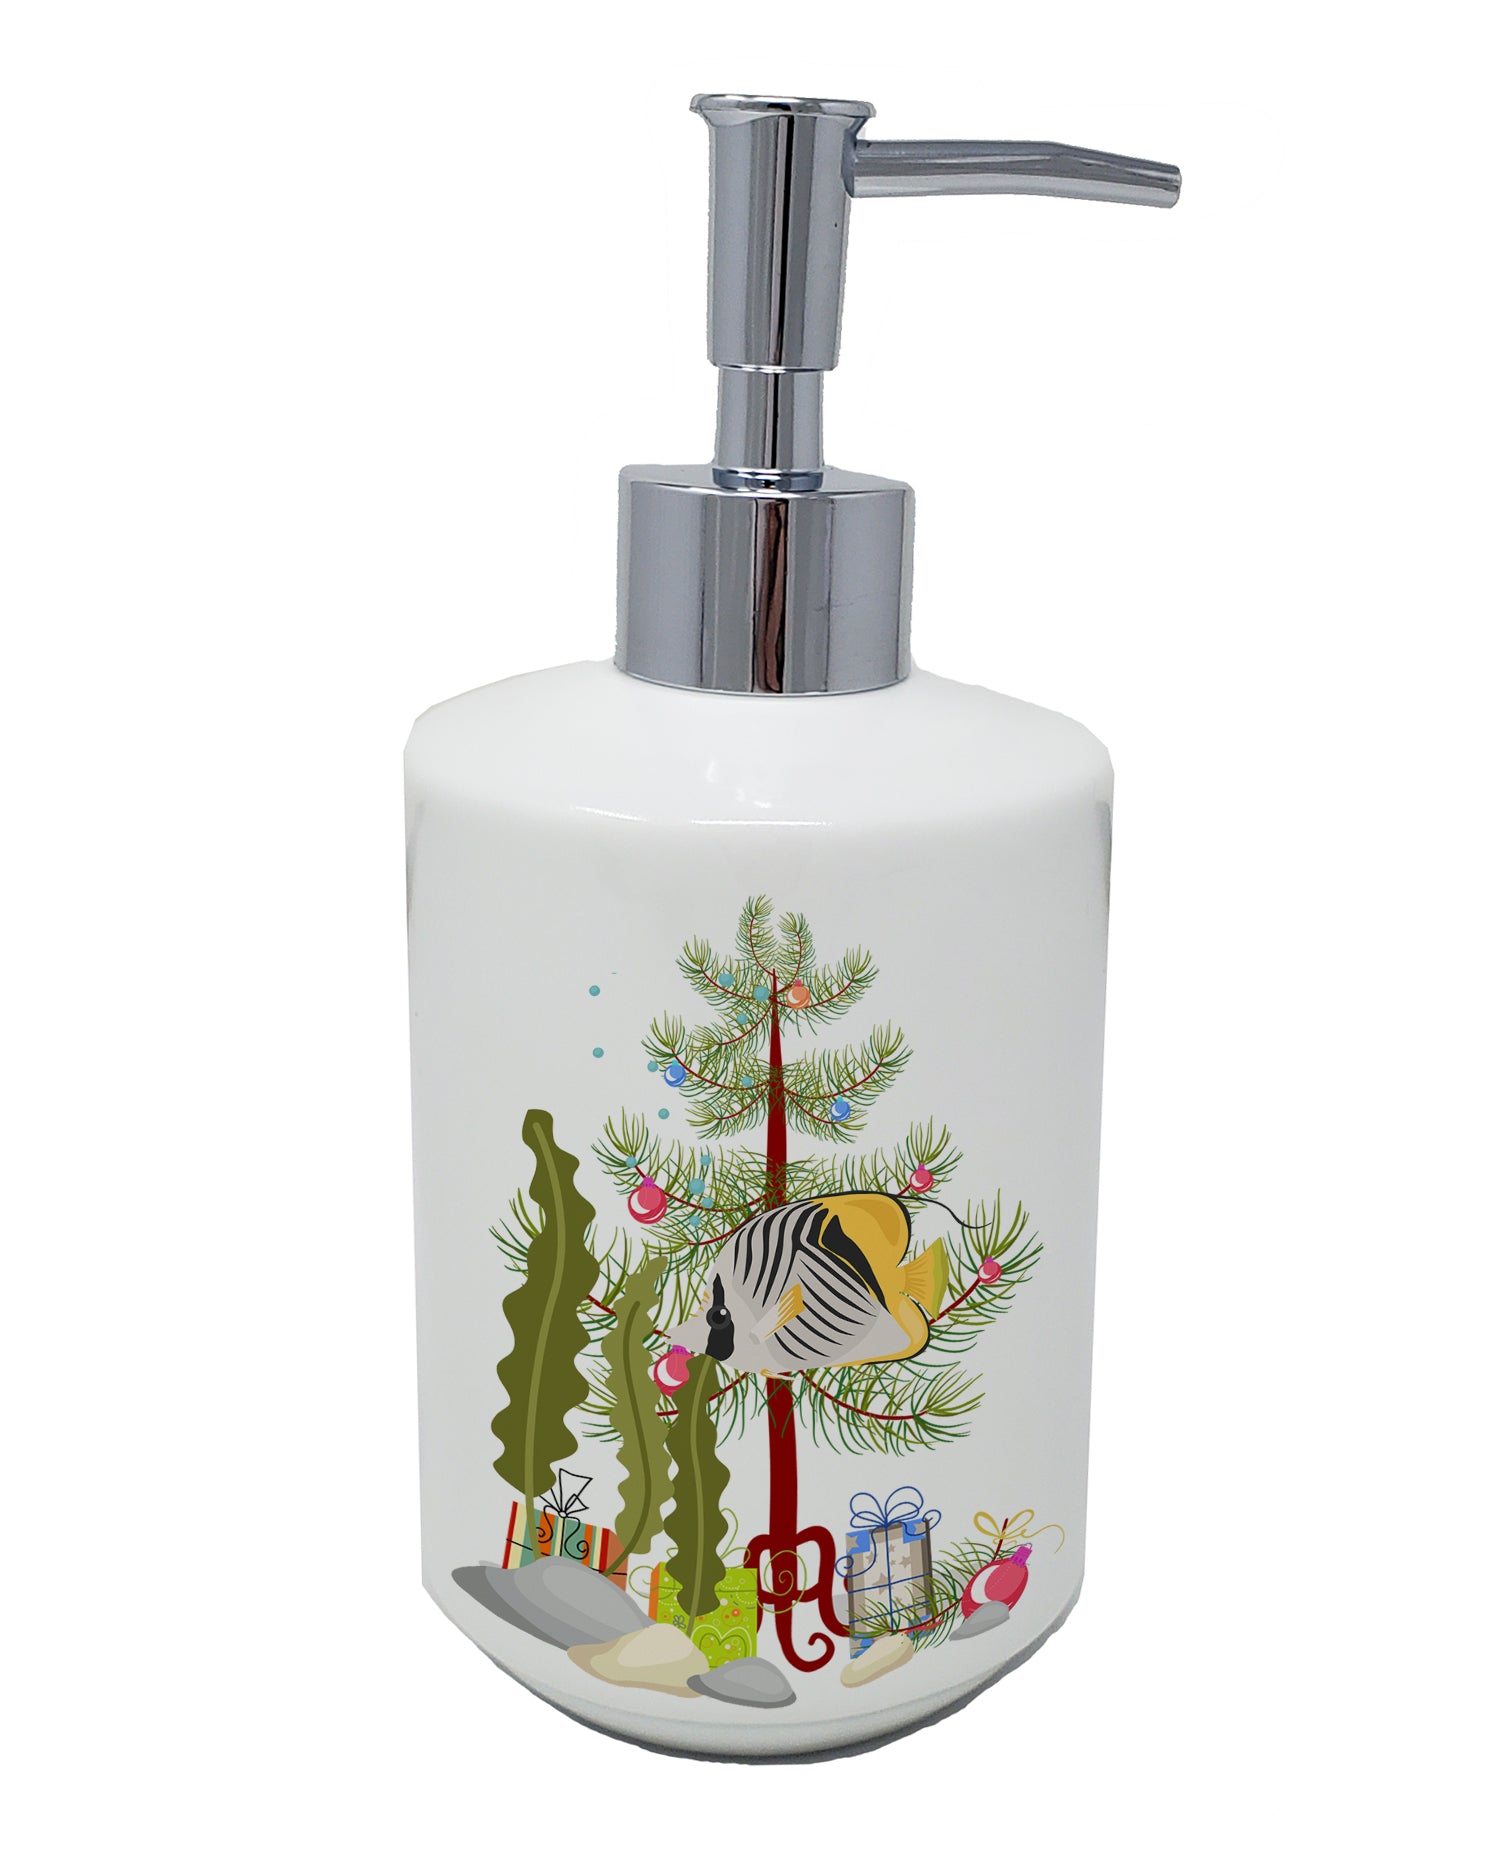 Buy this Butterfly Fish Merry Christmas Ceramic Soap Dispenser